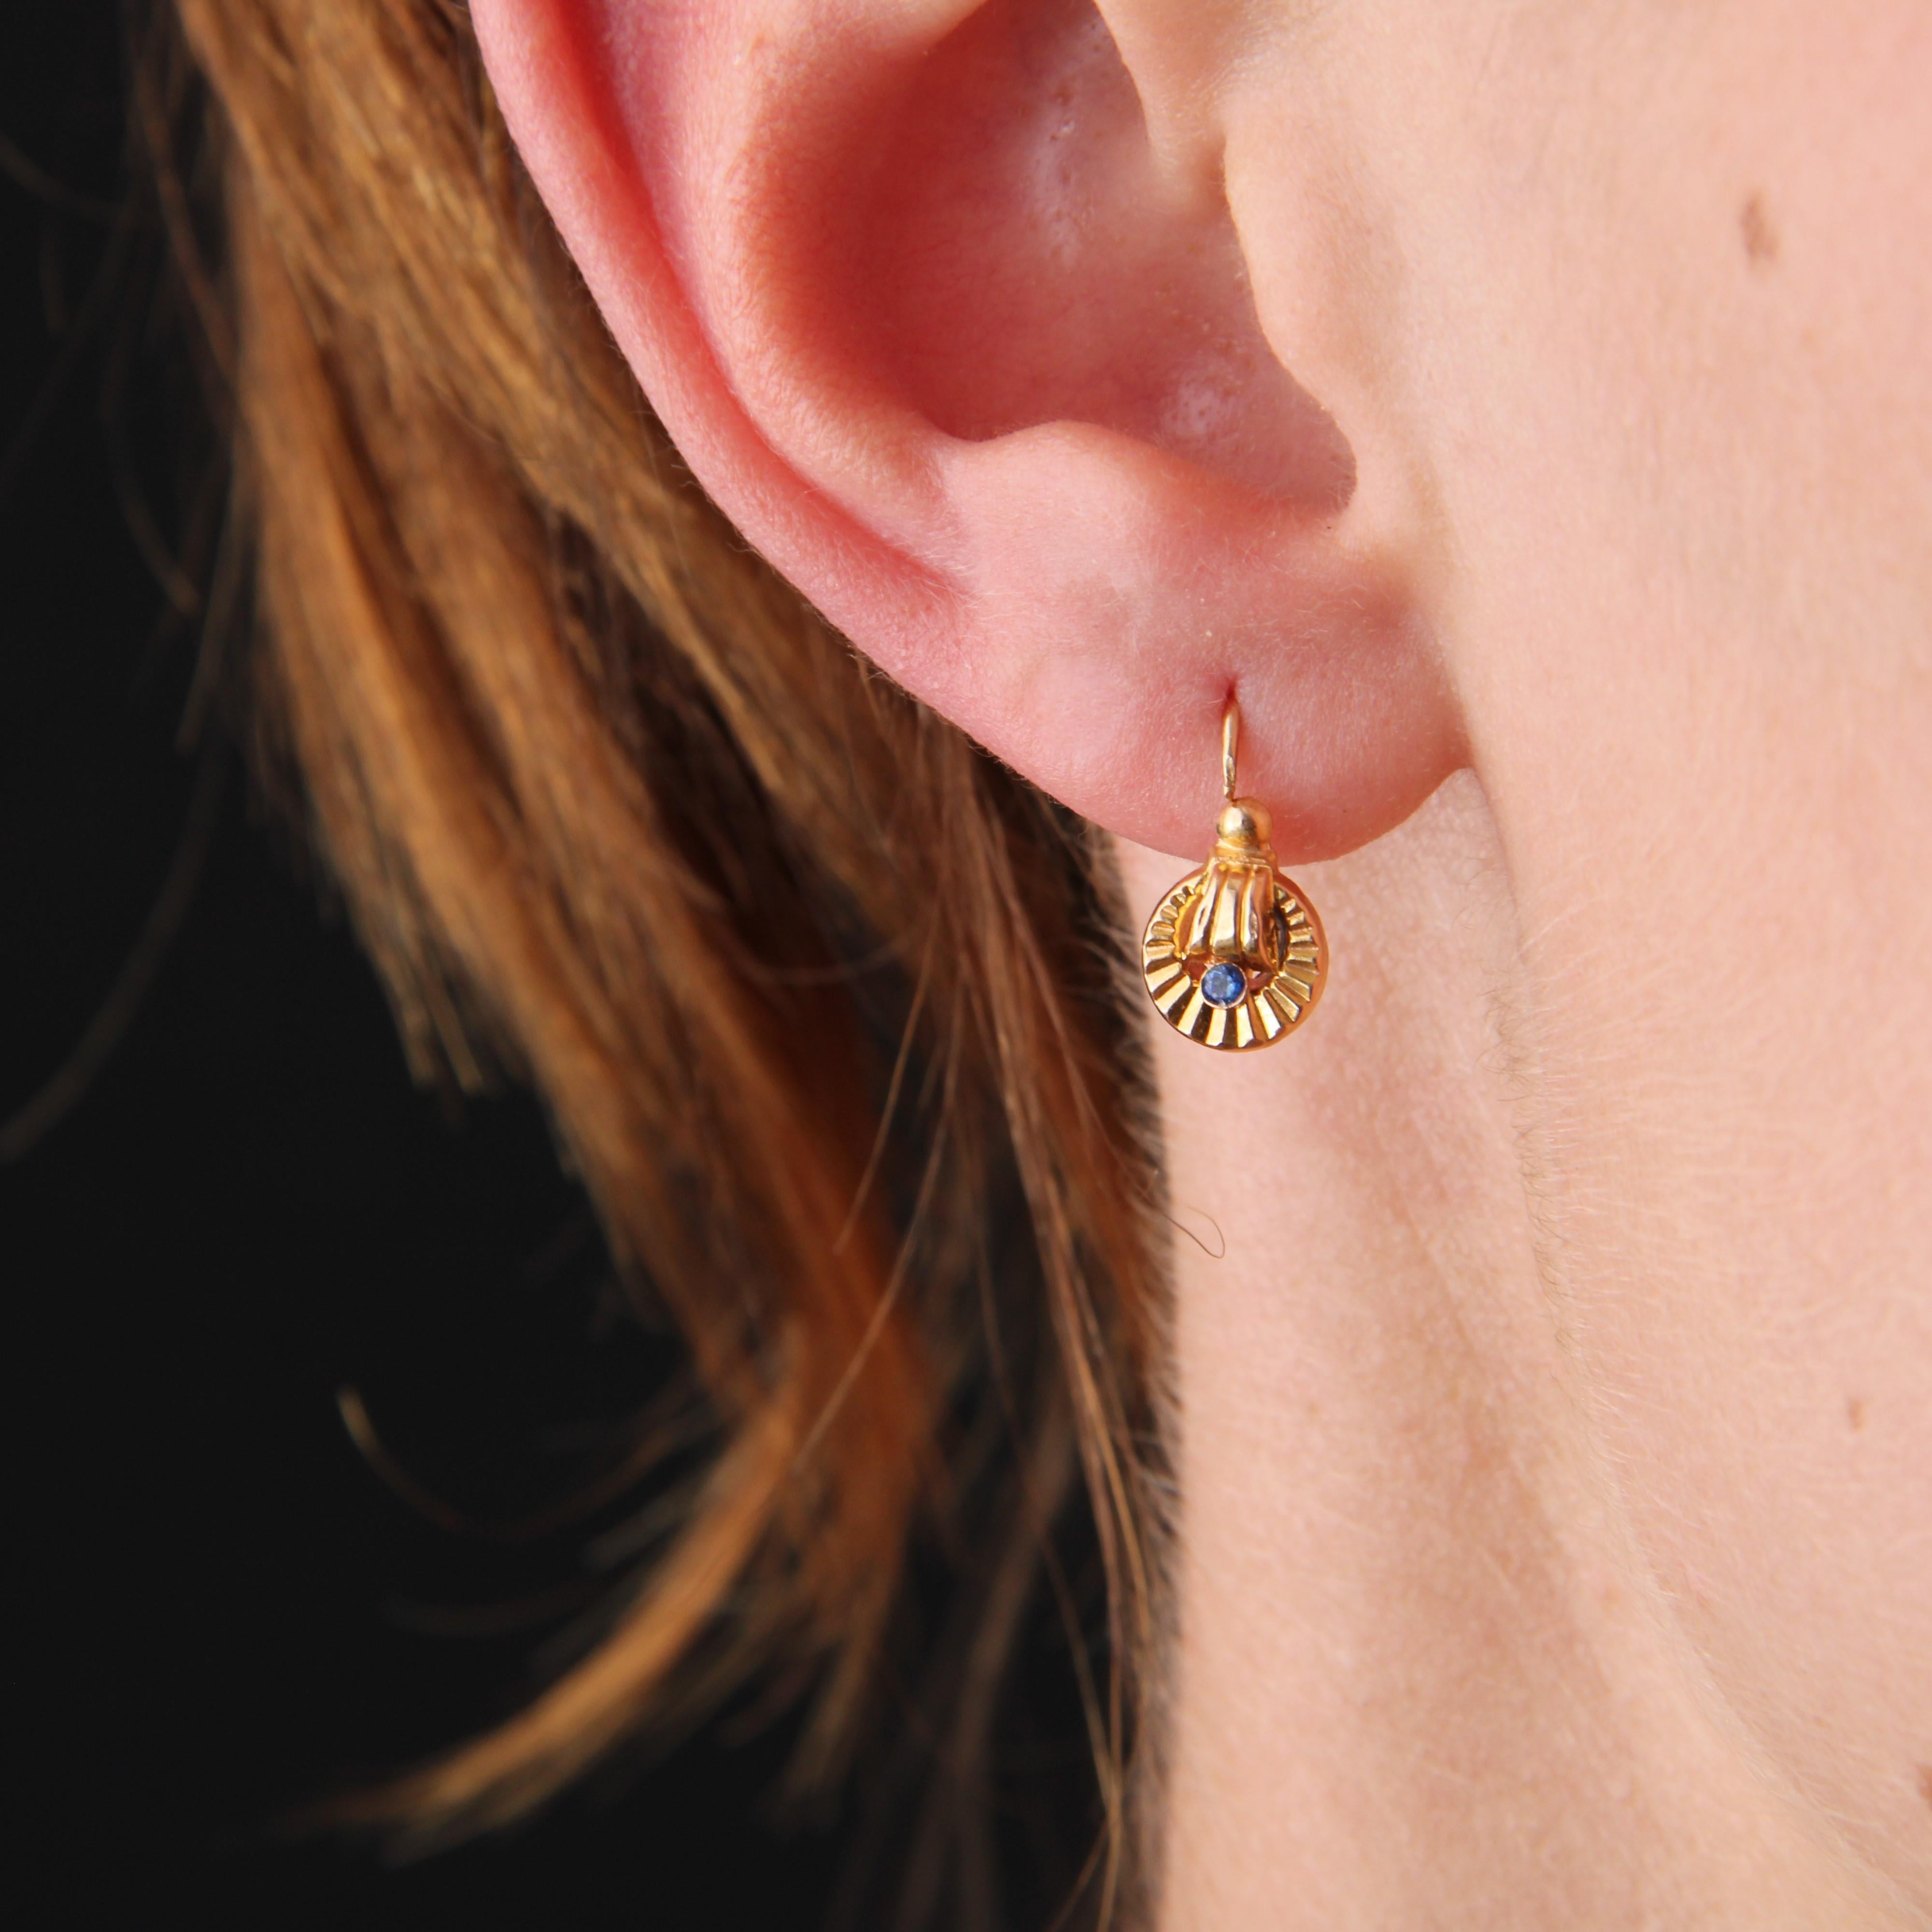 For pierced ears.
Earring in 18 karat rose gold, eagle head hallmark.
A pair of antique gold earrings, forming a striated gold circle topped with a gadrooned decoration and a gold pearl. The center is set with a sapphire. The clasp threads through